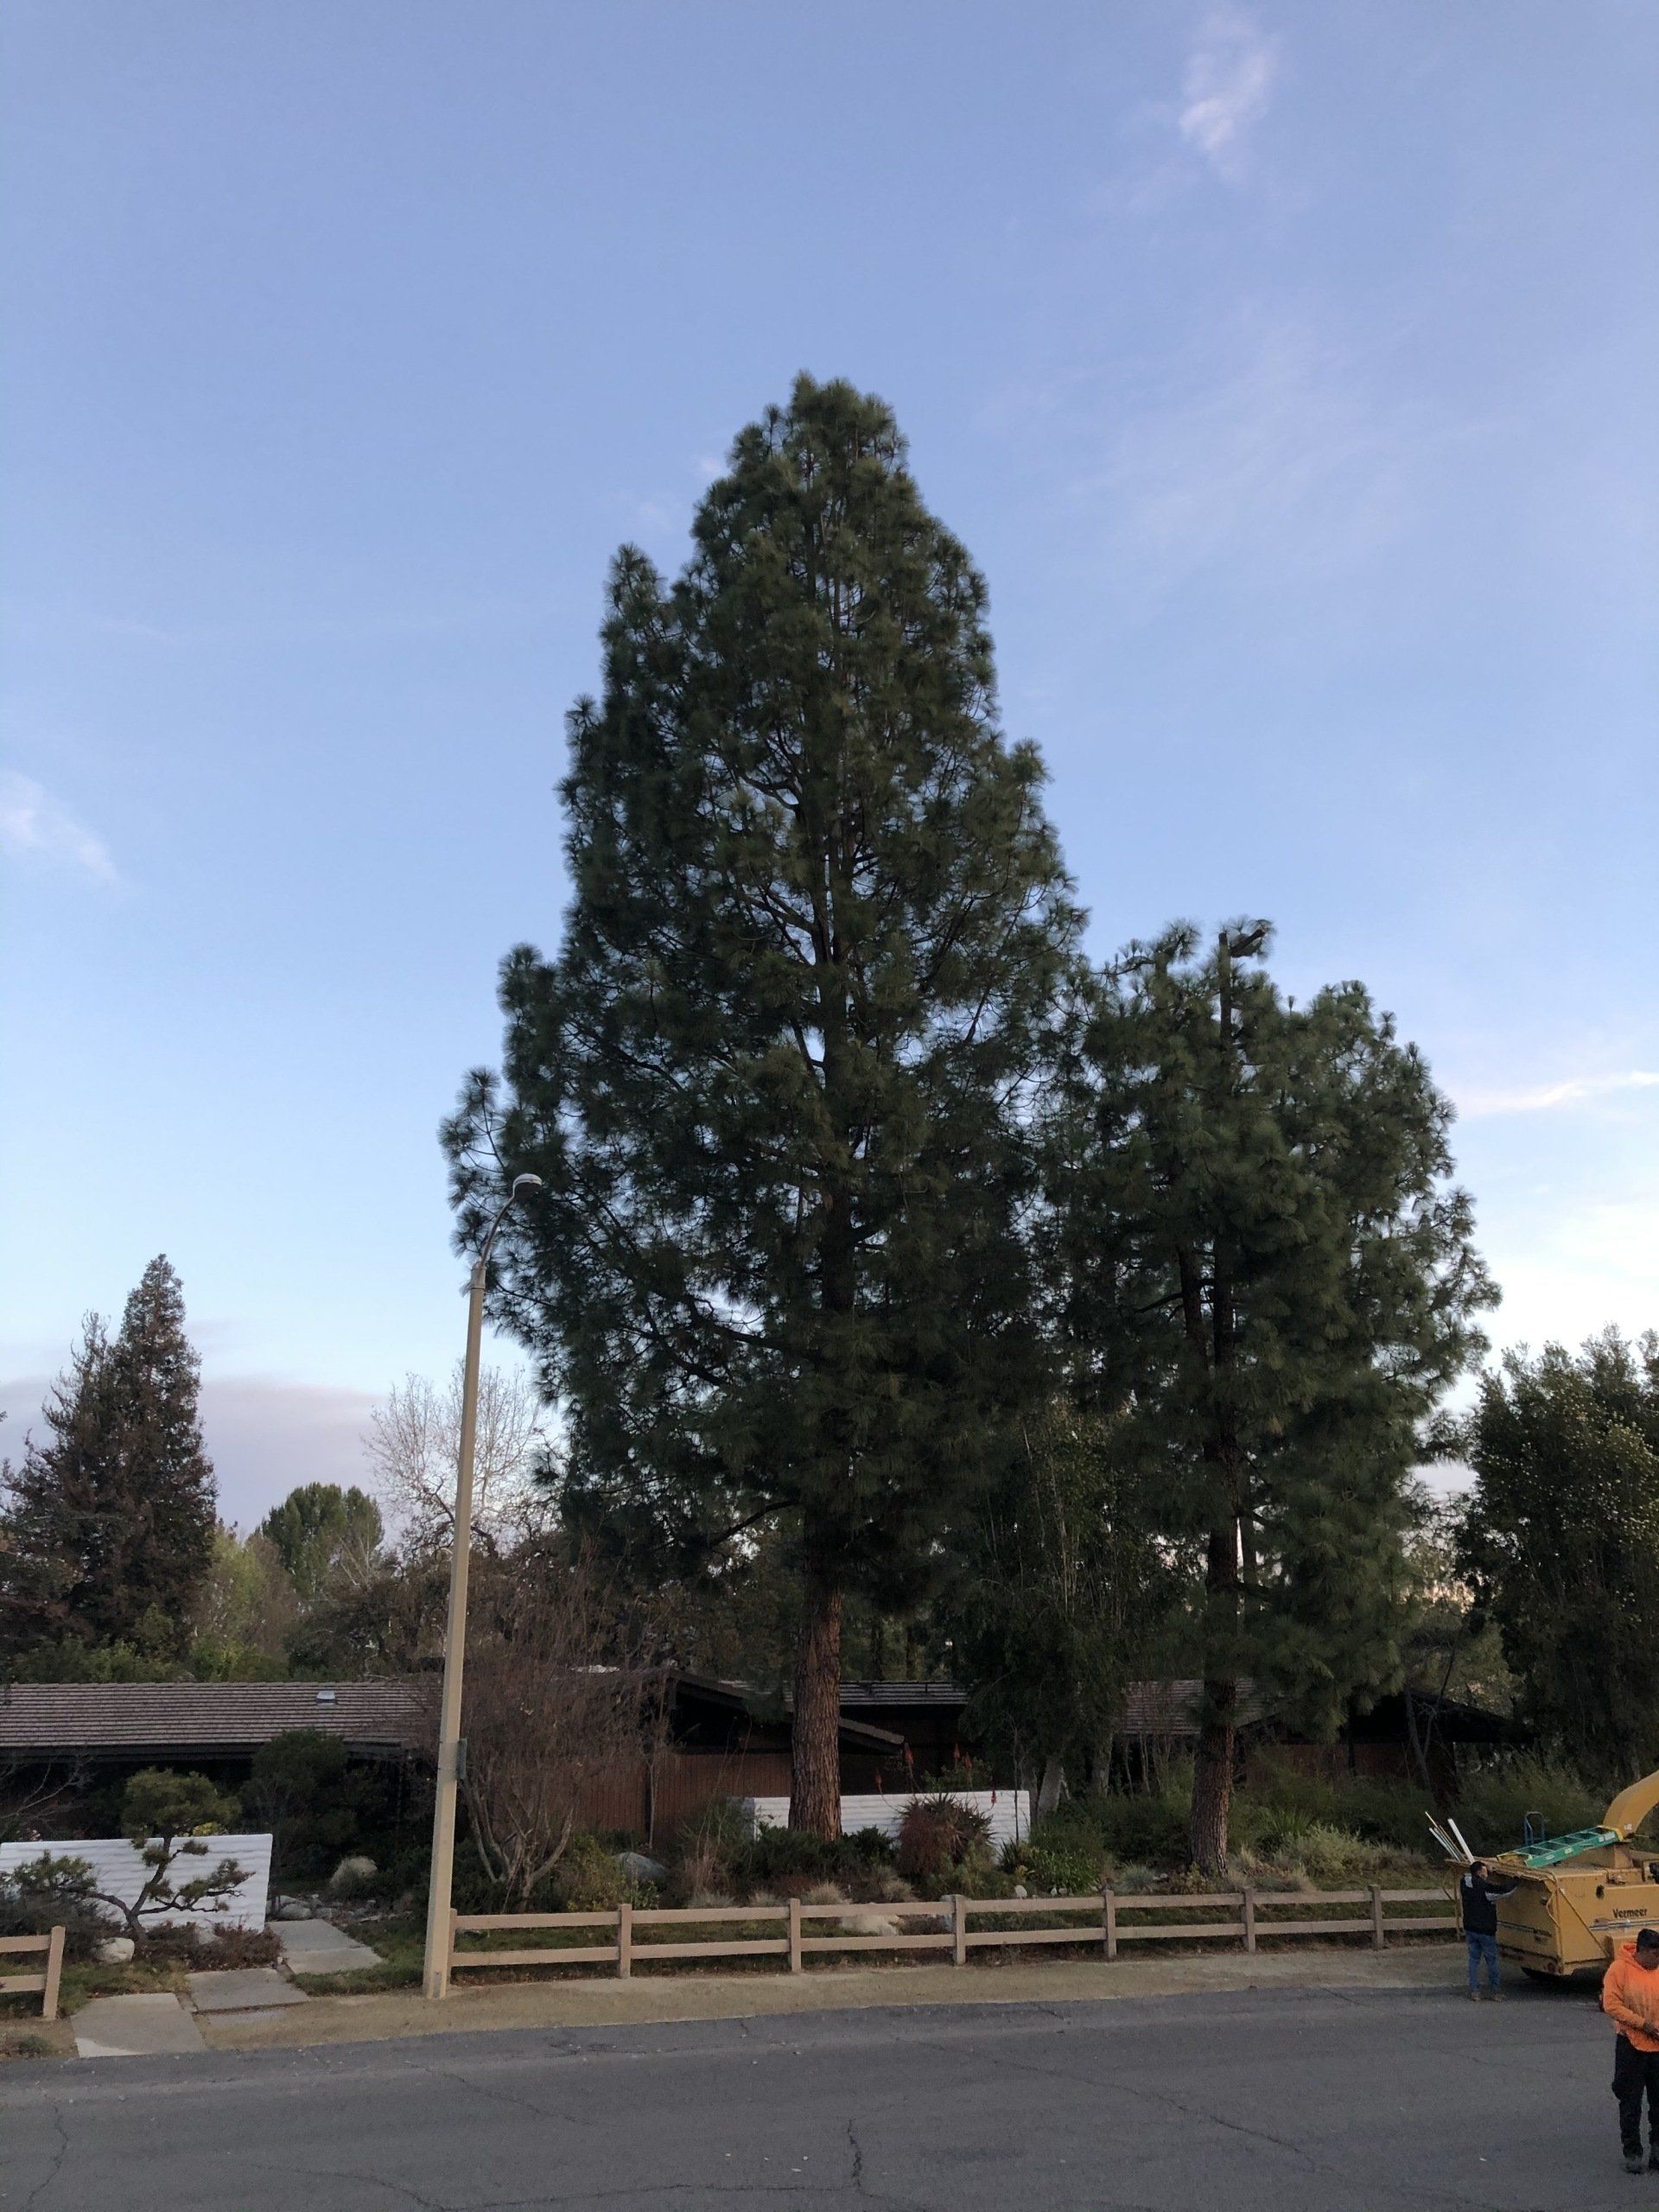 Palm Tree After — About Our Company in Thousand Oaks, CA